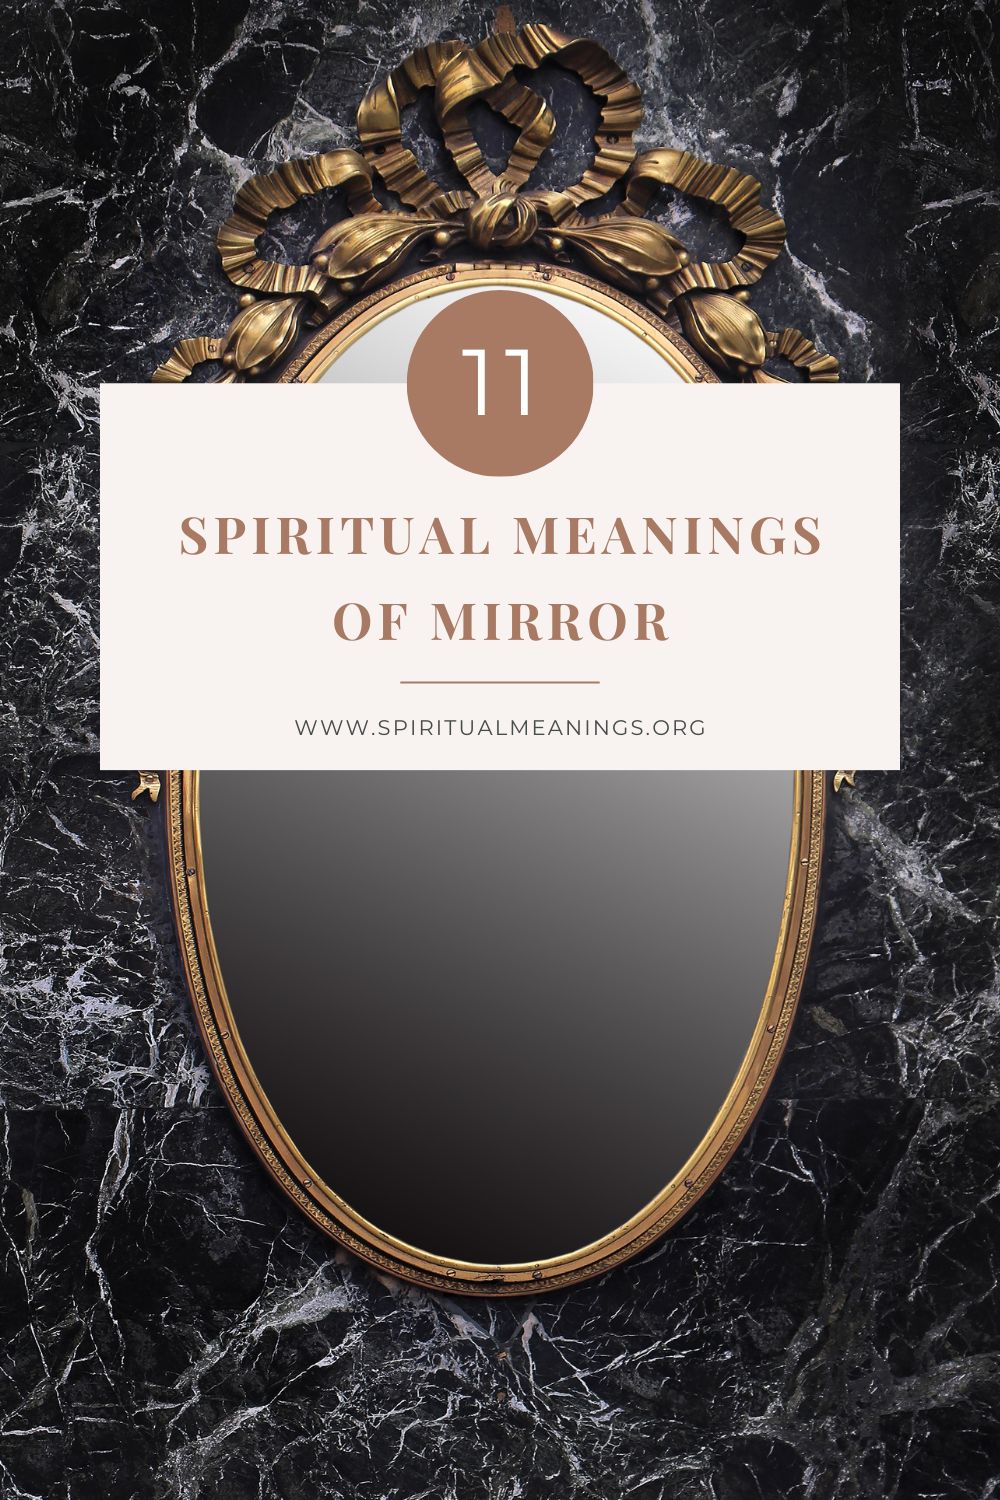 Spiritual Meanings of Mirror